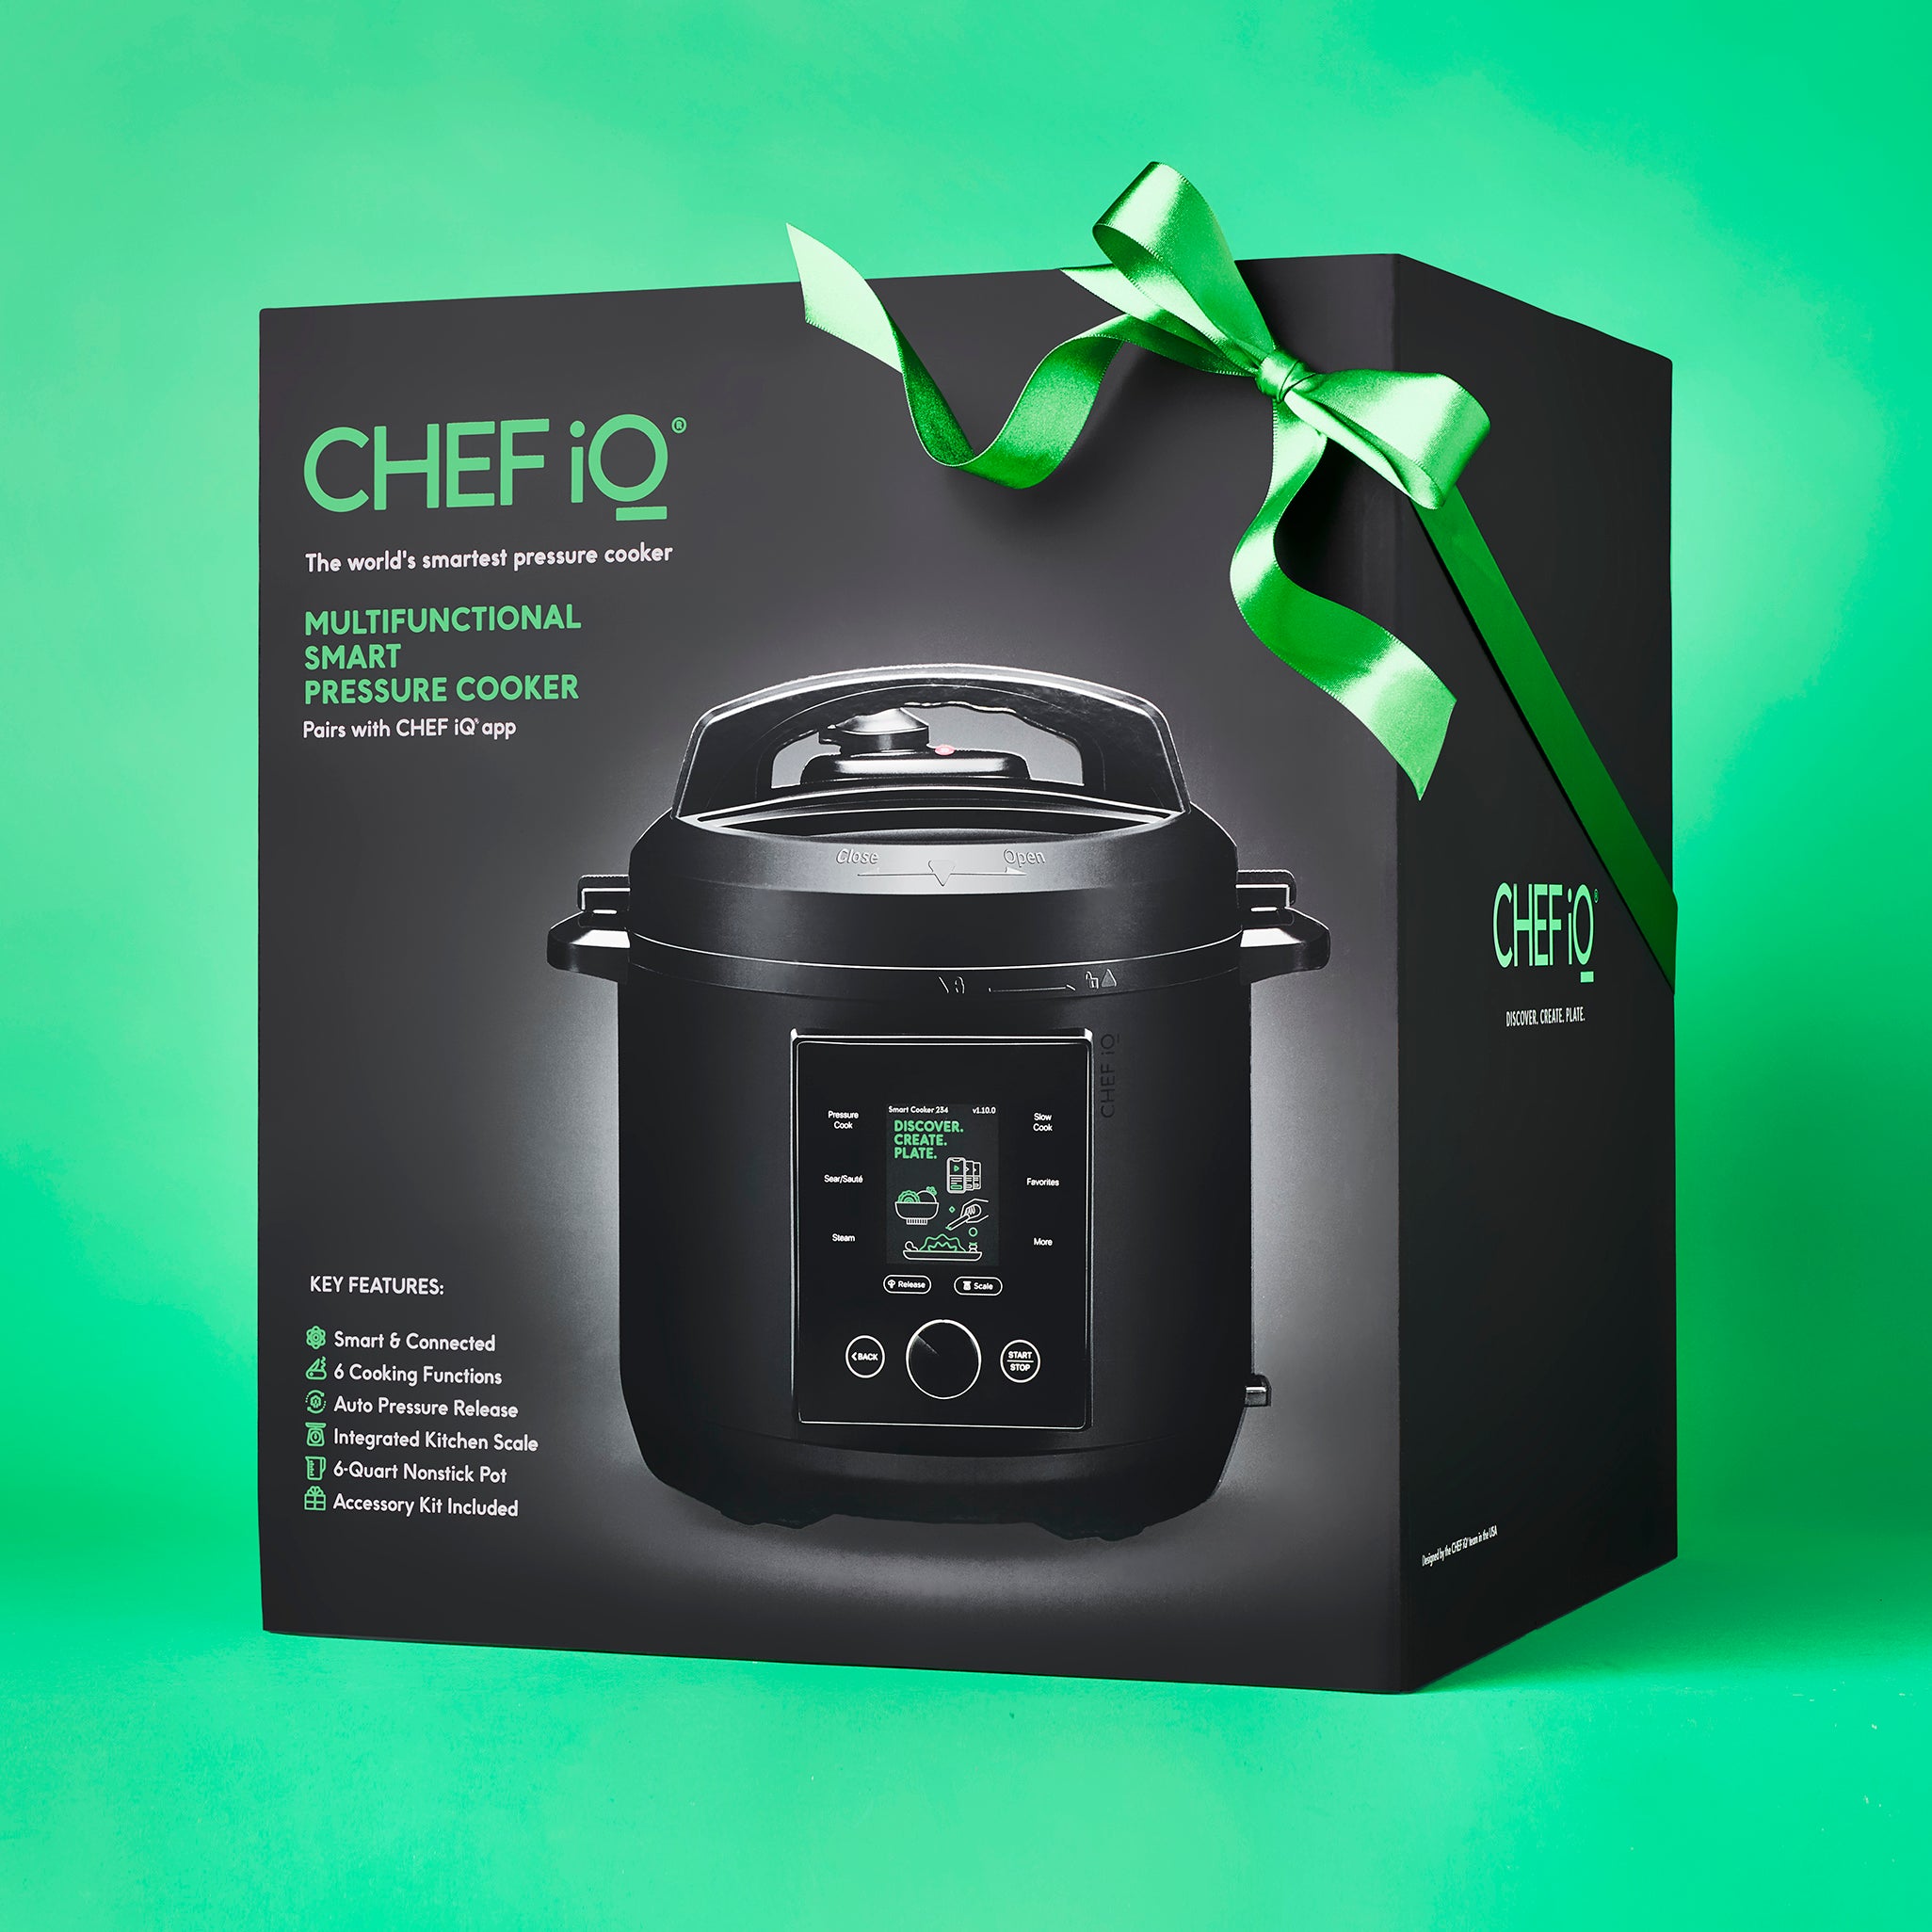 Holiday Gift Guide - the Chef